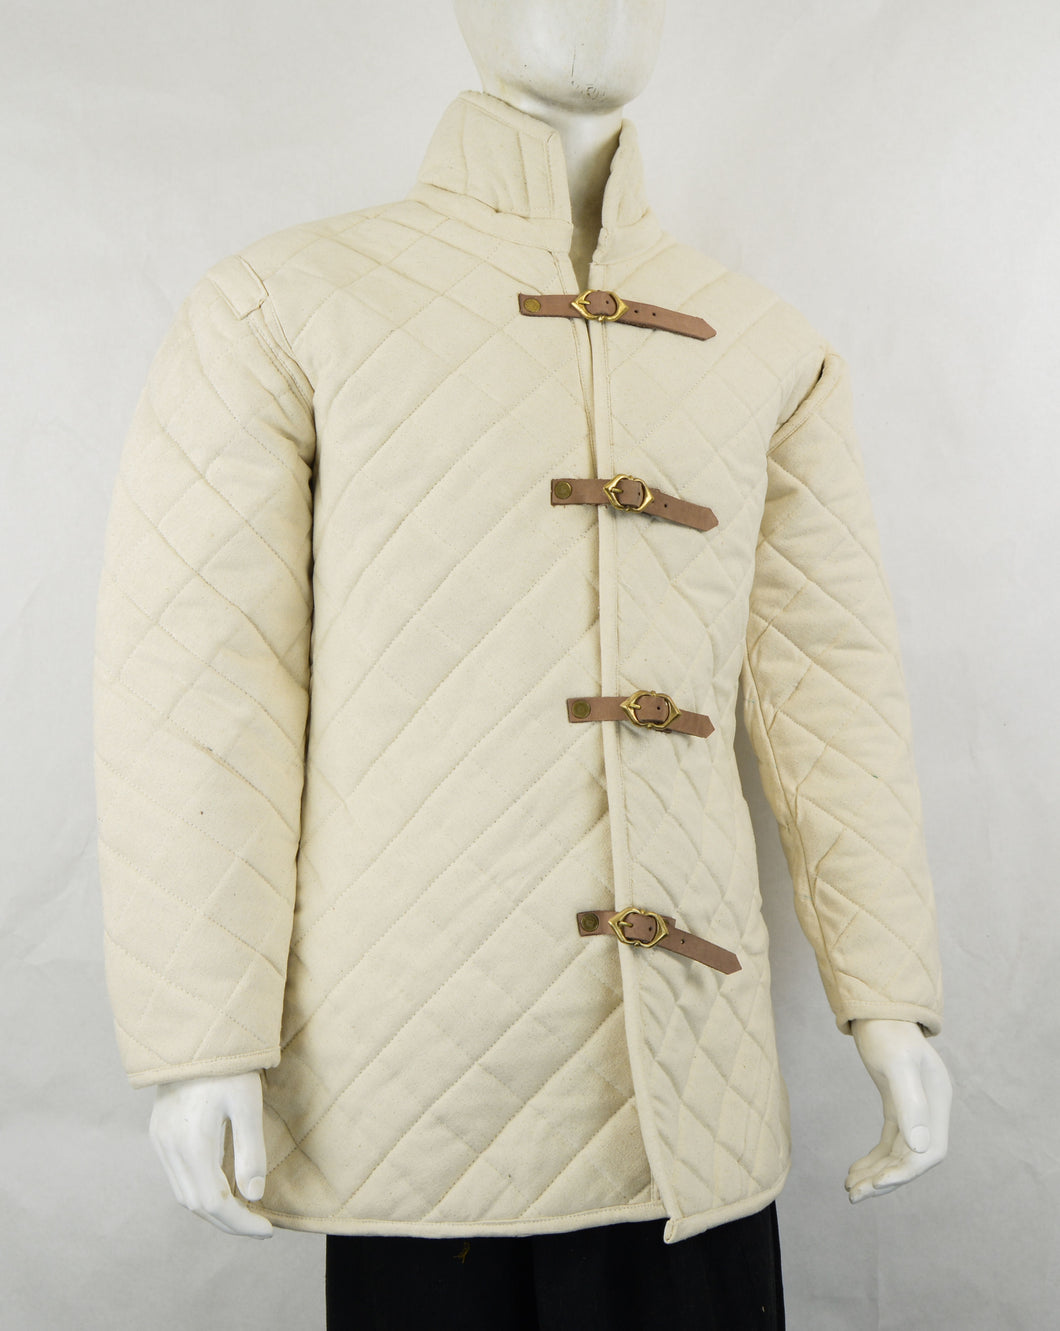 Front Buckled Gambeson with Open Armpit Design